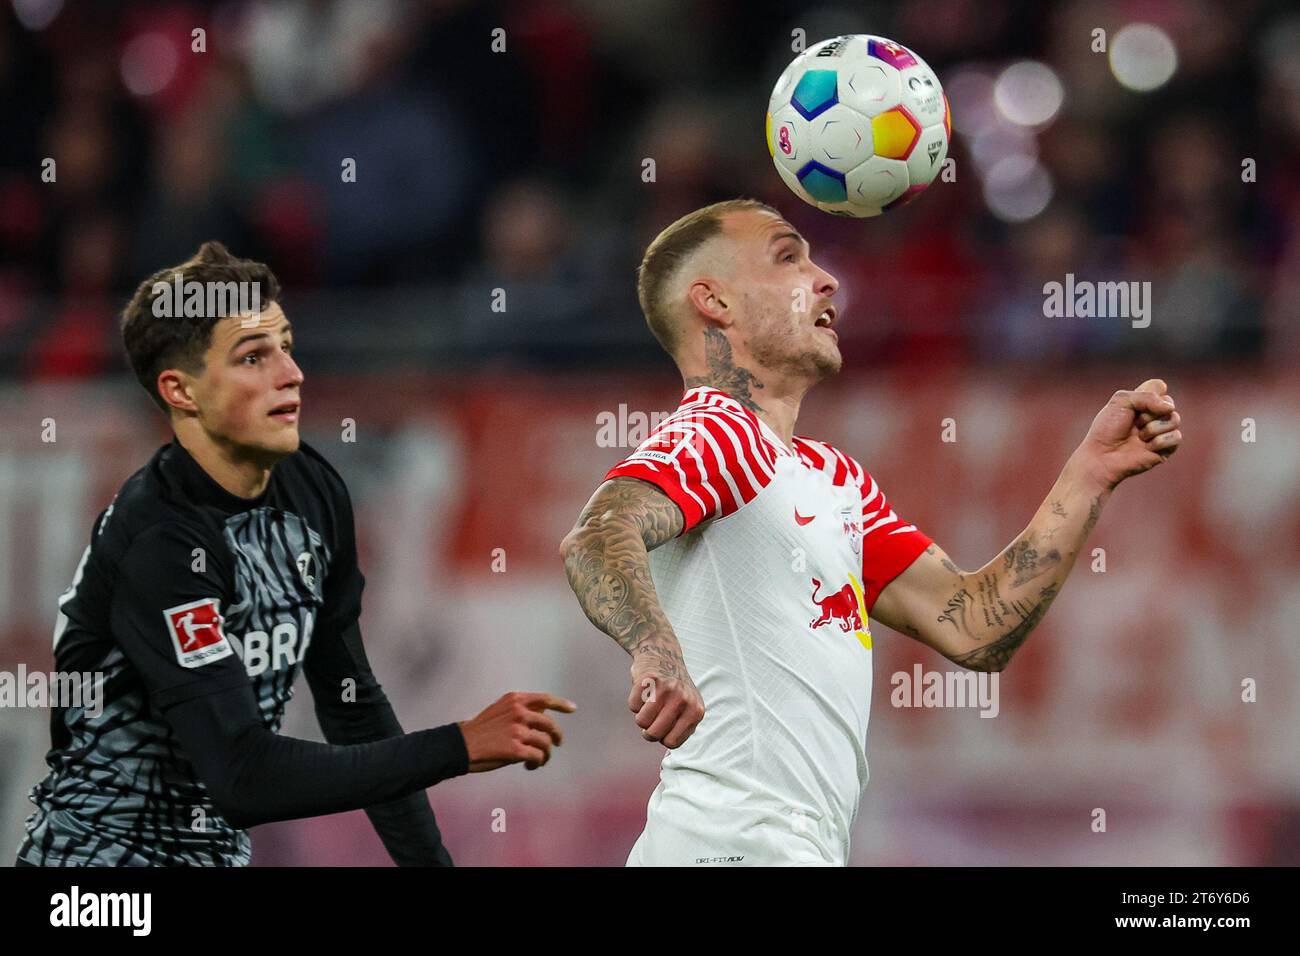 12 November 2023, Saxony, Leipzig: Soccer: Bundesliga, matchday 11, RB Leipzig - SC Freiburg at the Red Bull Arena. Leipzig's David Raum (r) and Freiburg's Merlin Röhl in a duel. Photo: Jan Woitas/dpa - IMPORTANT NOTE: In accordance with the regulations of the DFL German Football League and the DFB German Football Association, it is prohibited to utilize or have utilized photographs taken in the stadium and/or of the match in the form of sequential images and/or video-like photo series. Stock Photo